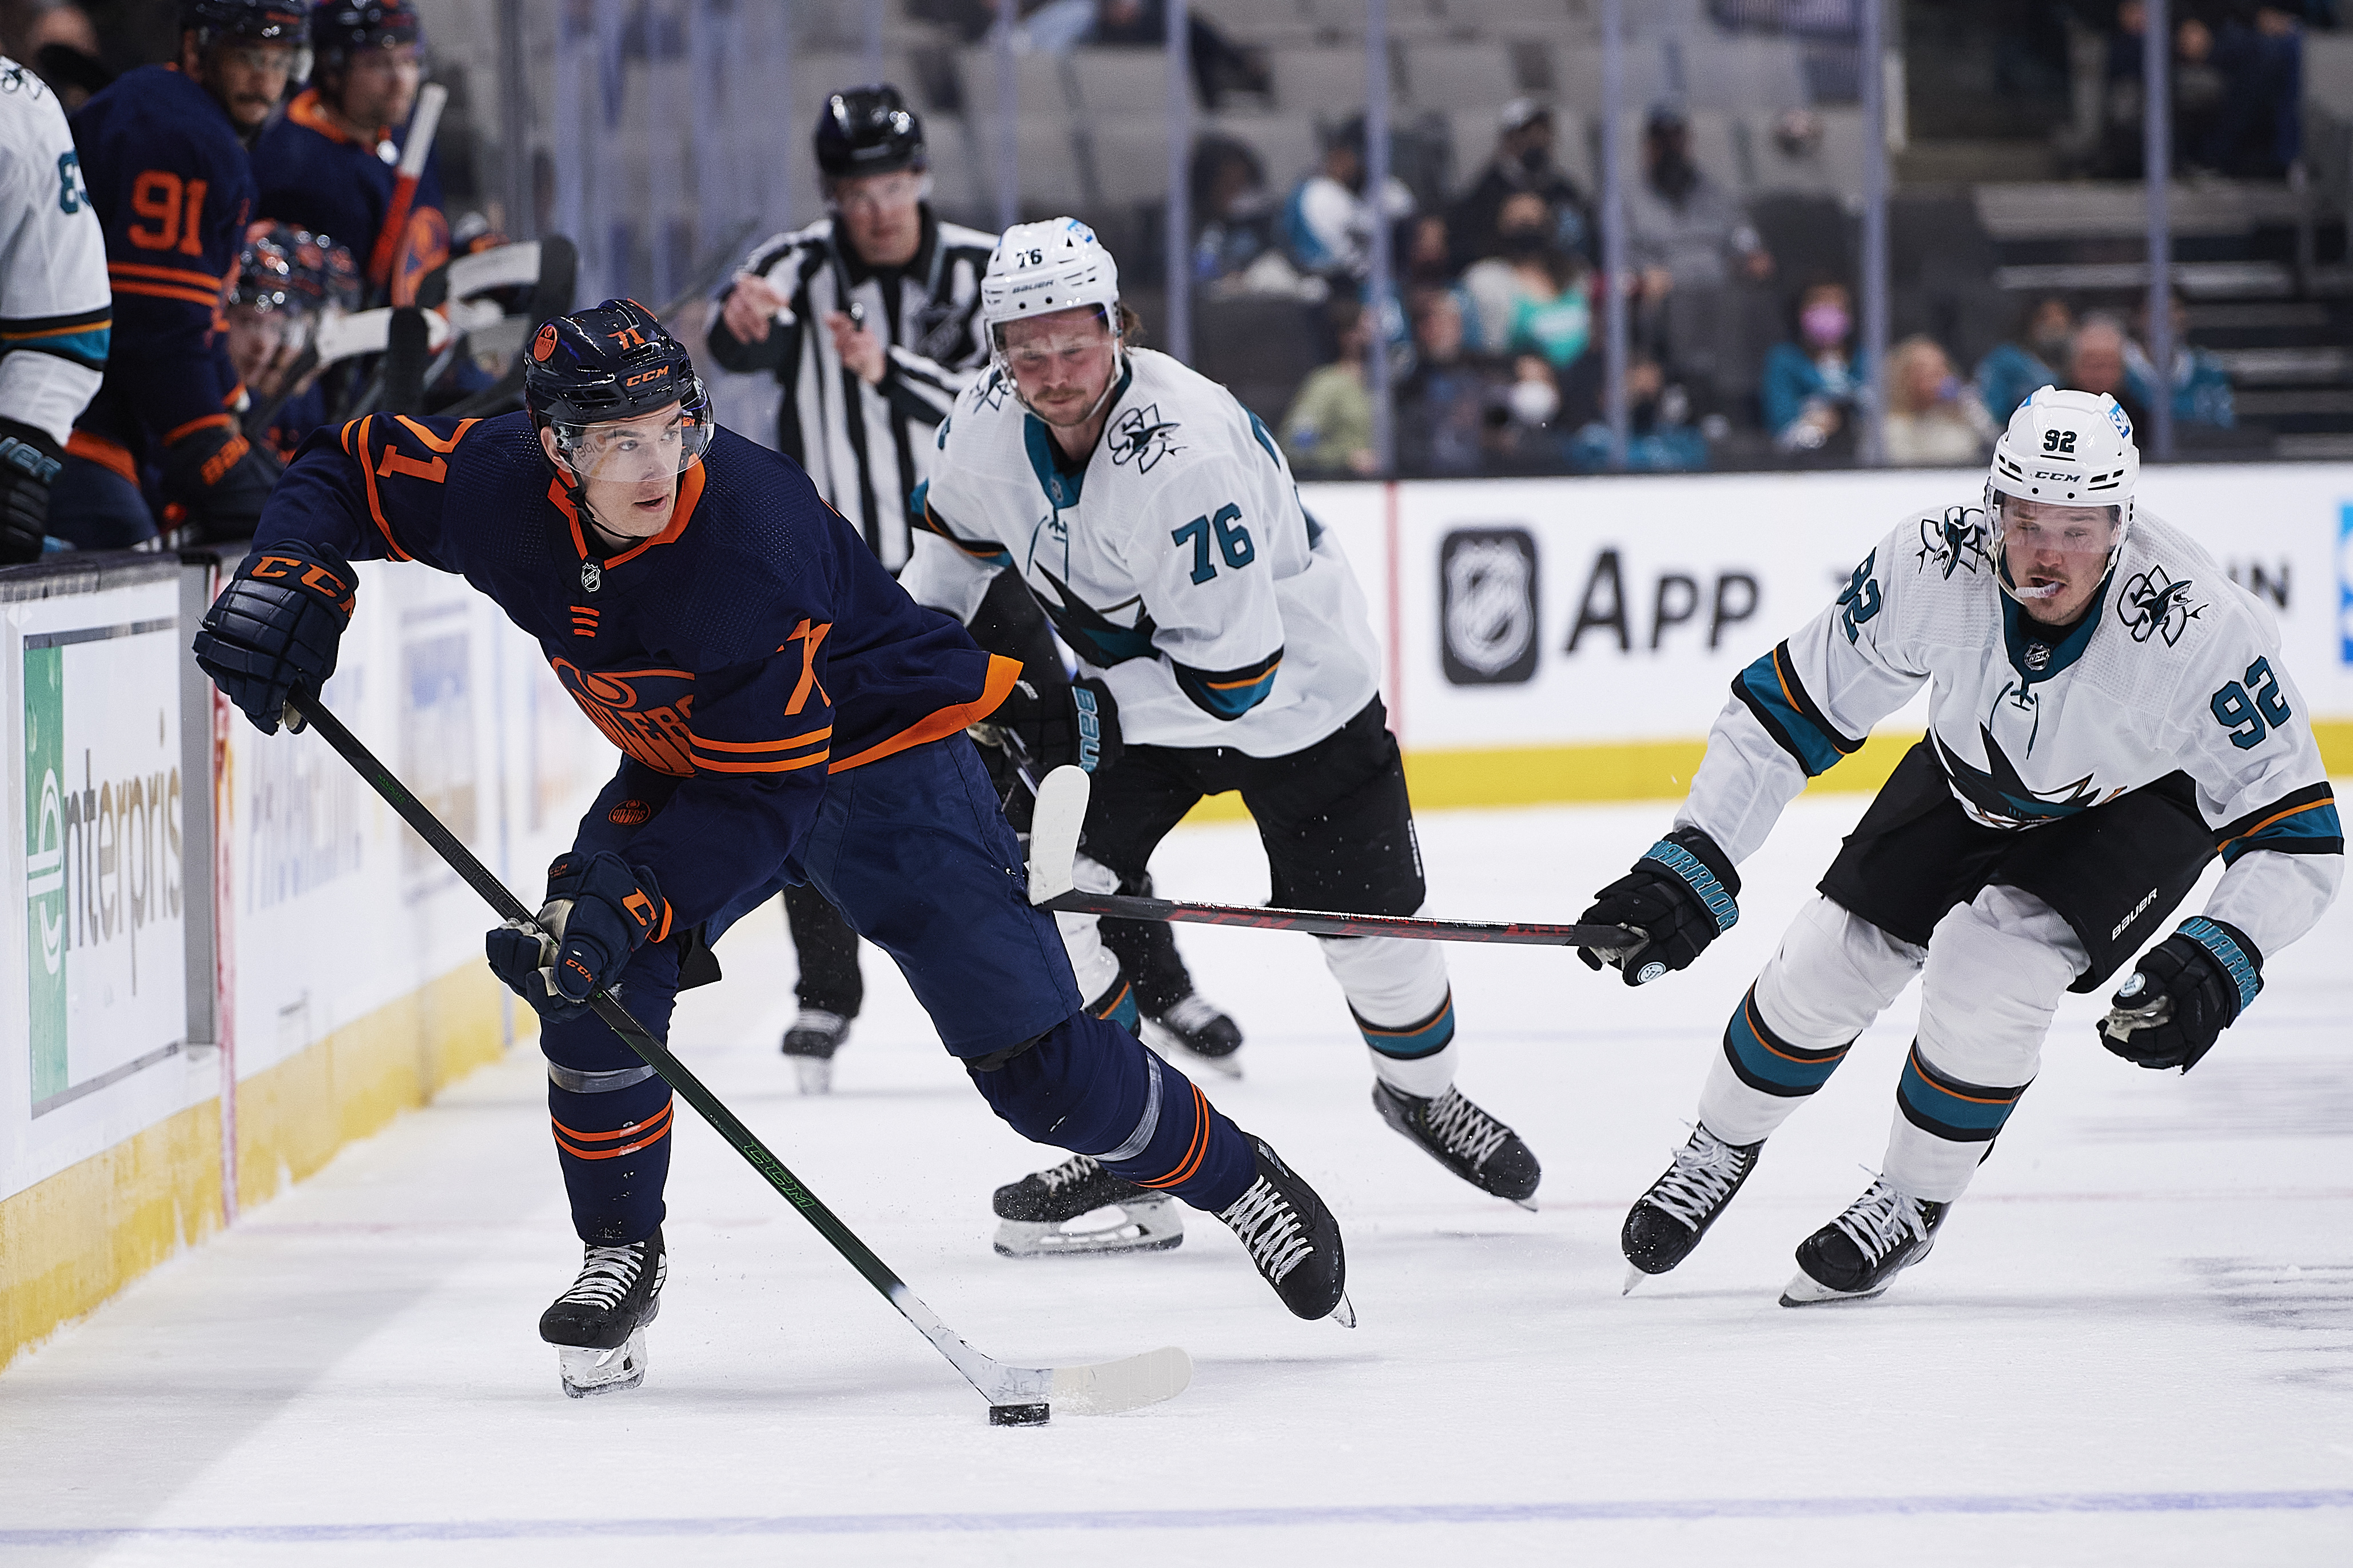 Edmonton Oilers center Ryan McLeod (71) carries the puck during the NHL game between the San Jose Sharks and the Edmonton Oilers on February 14, 2022 at SAP Center in San Jose, CA.